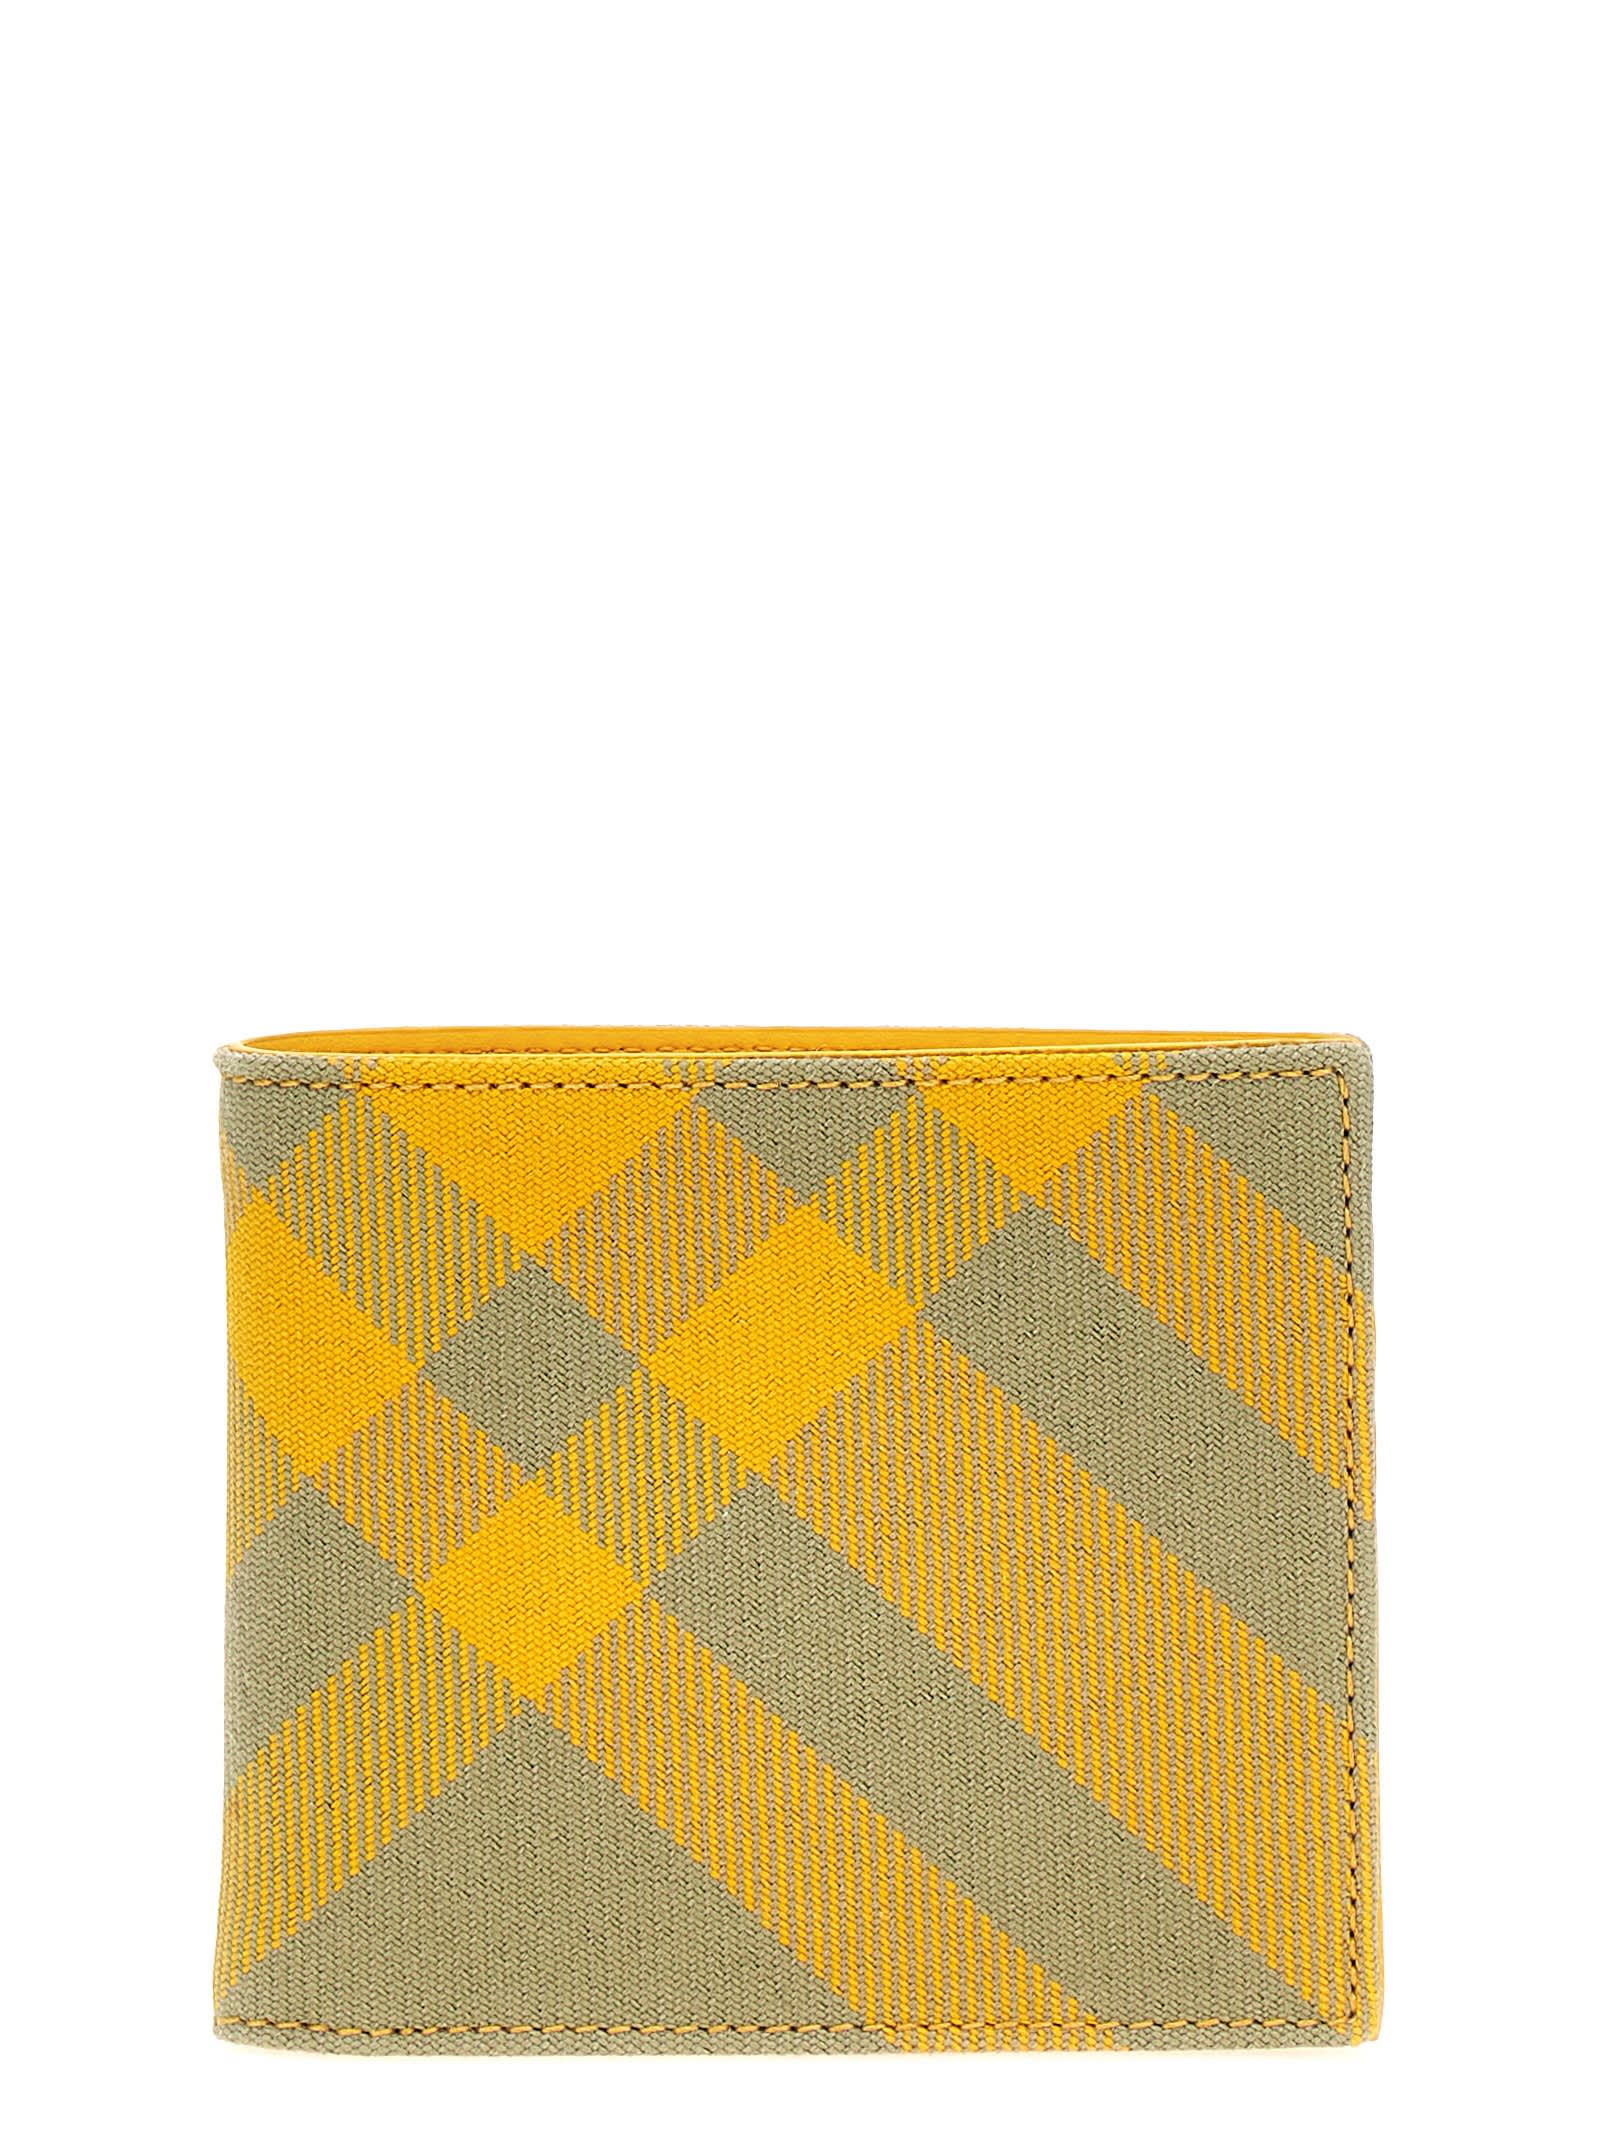 Burberry Check Wallet In Yellow